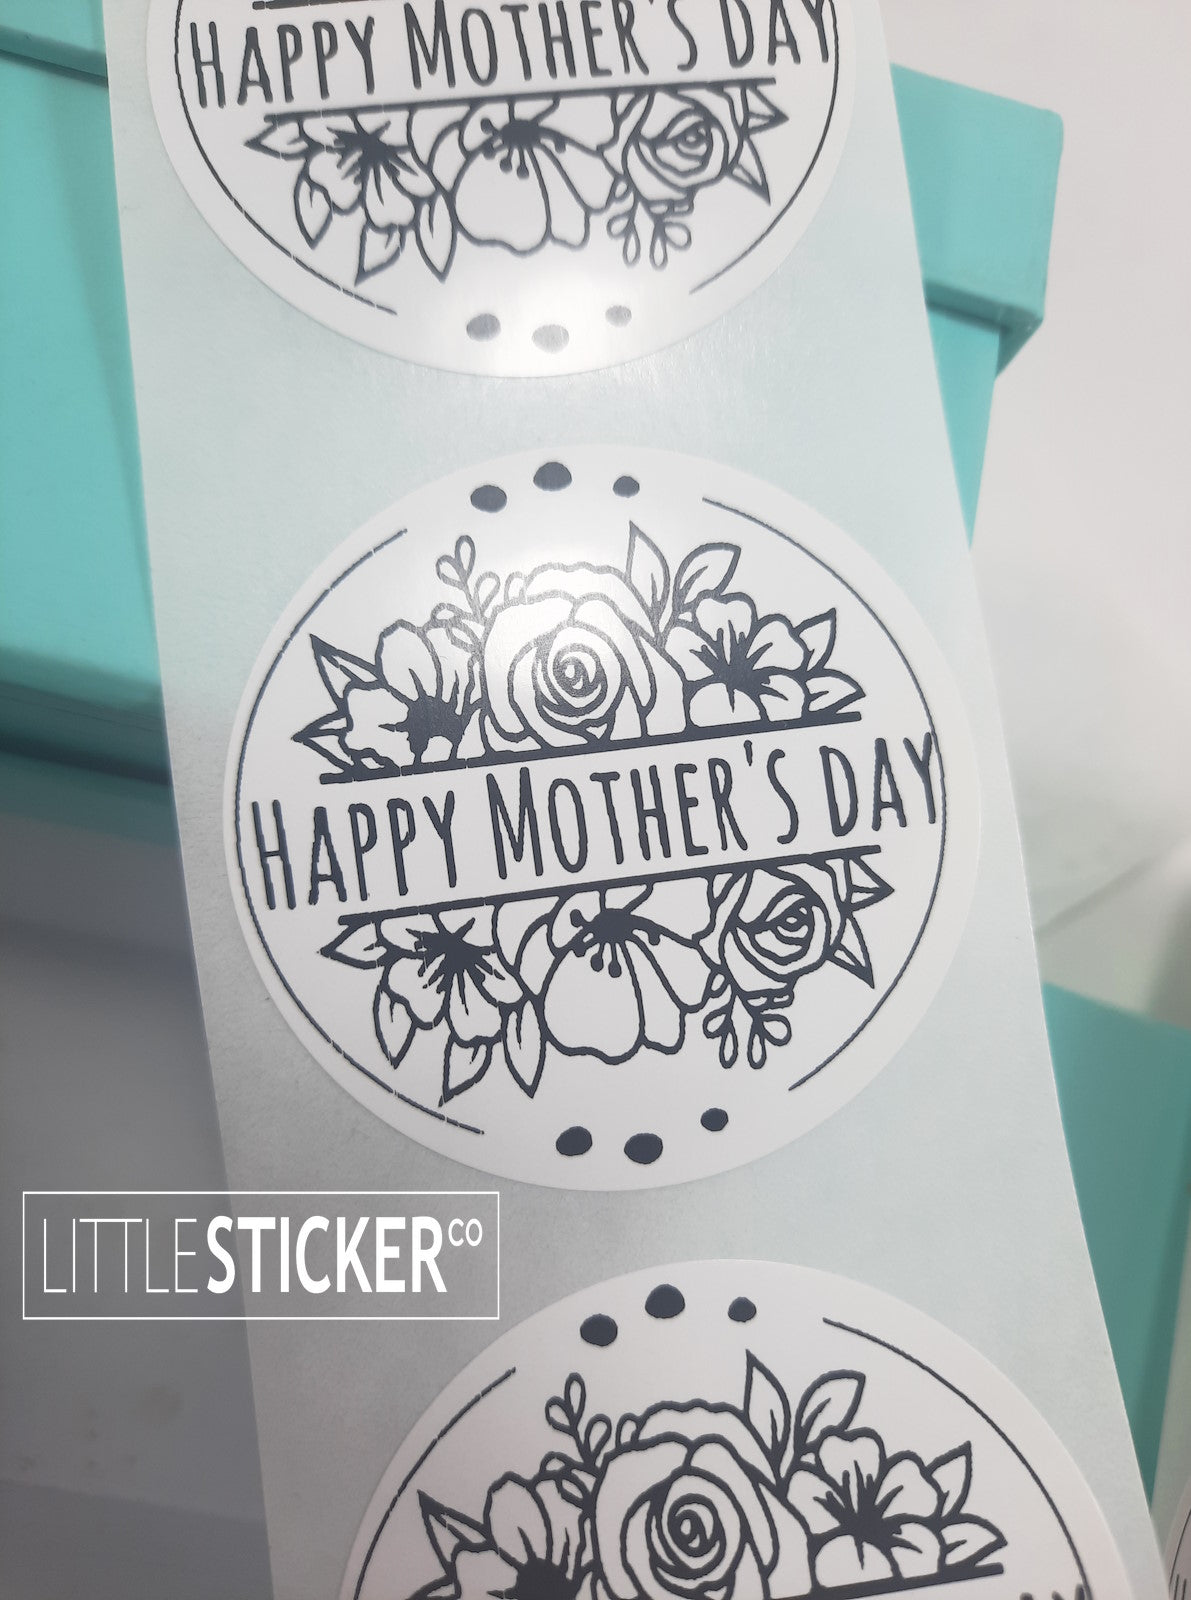 Happy Mother's Day stickers. 50mm round white gloss stickers with floral design